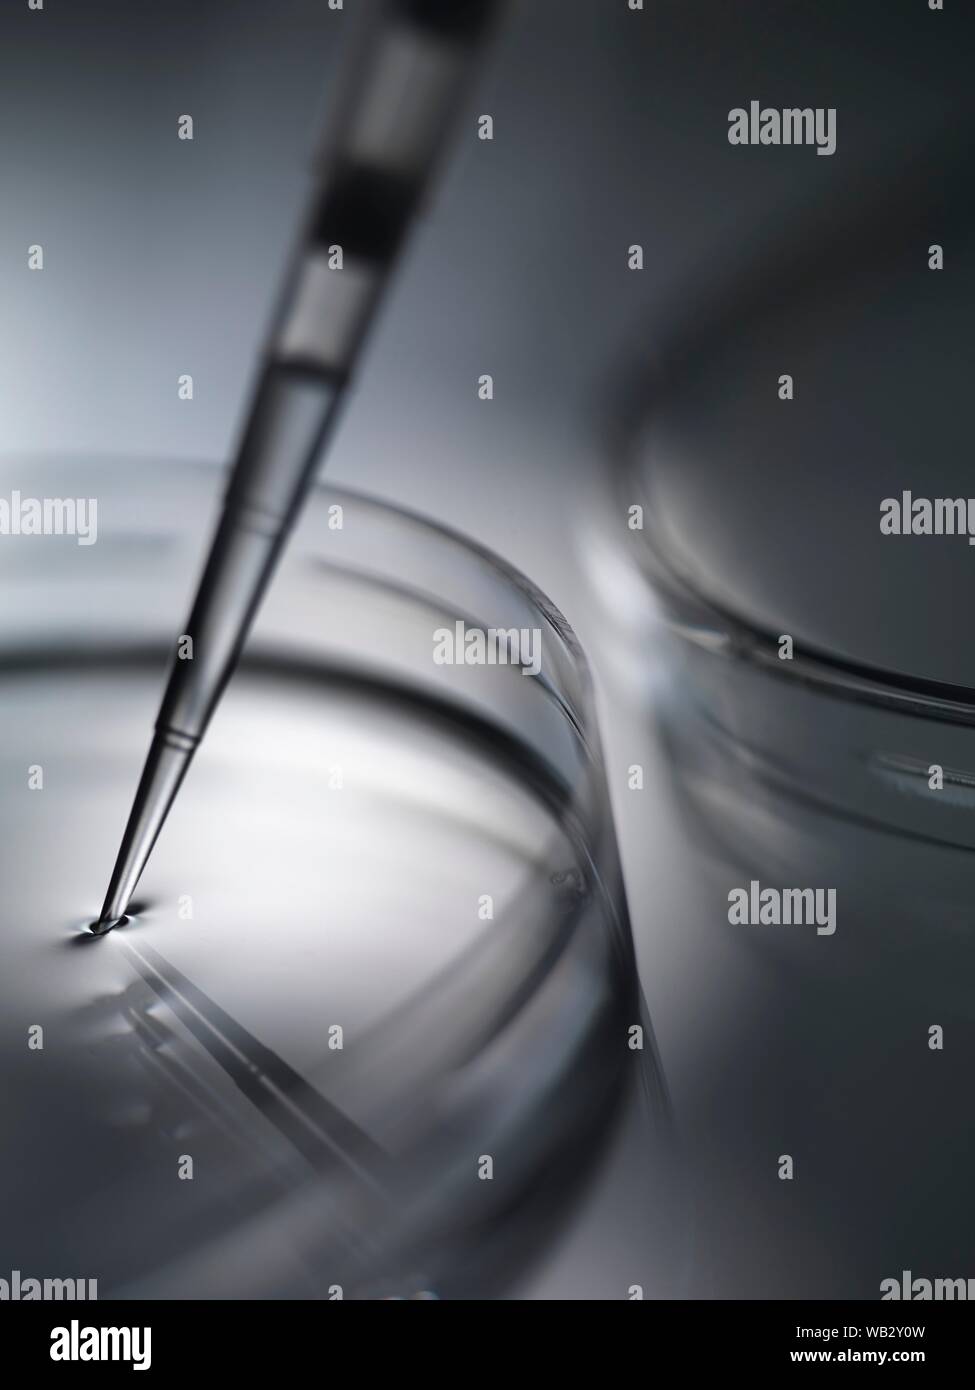 Biomedical research. Sample being pipetted into petri dishes containing medium. Stock Photo